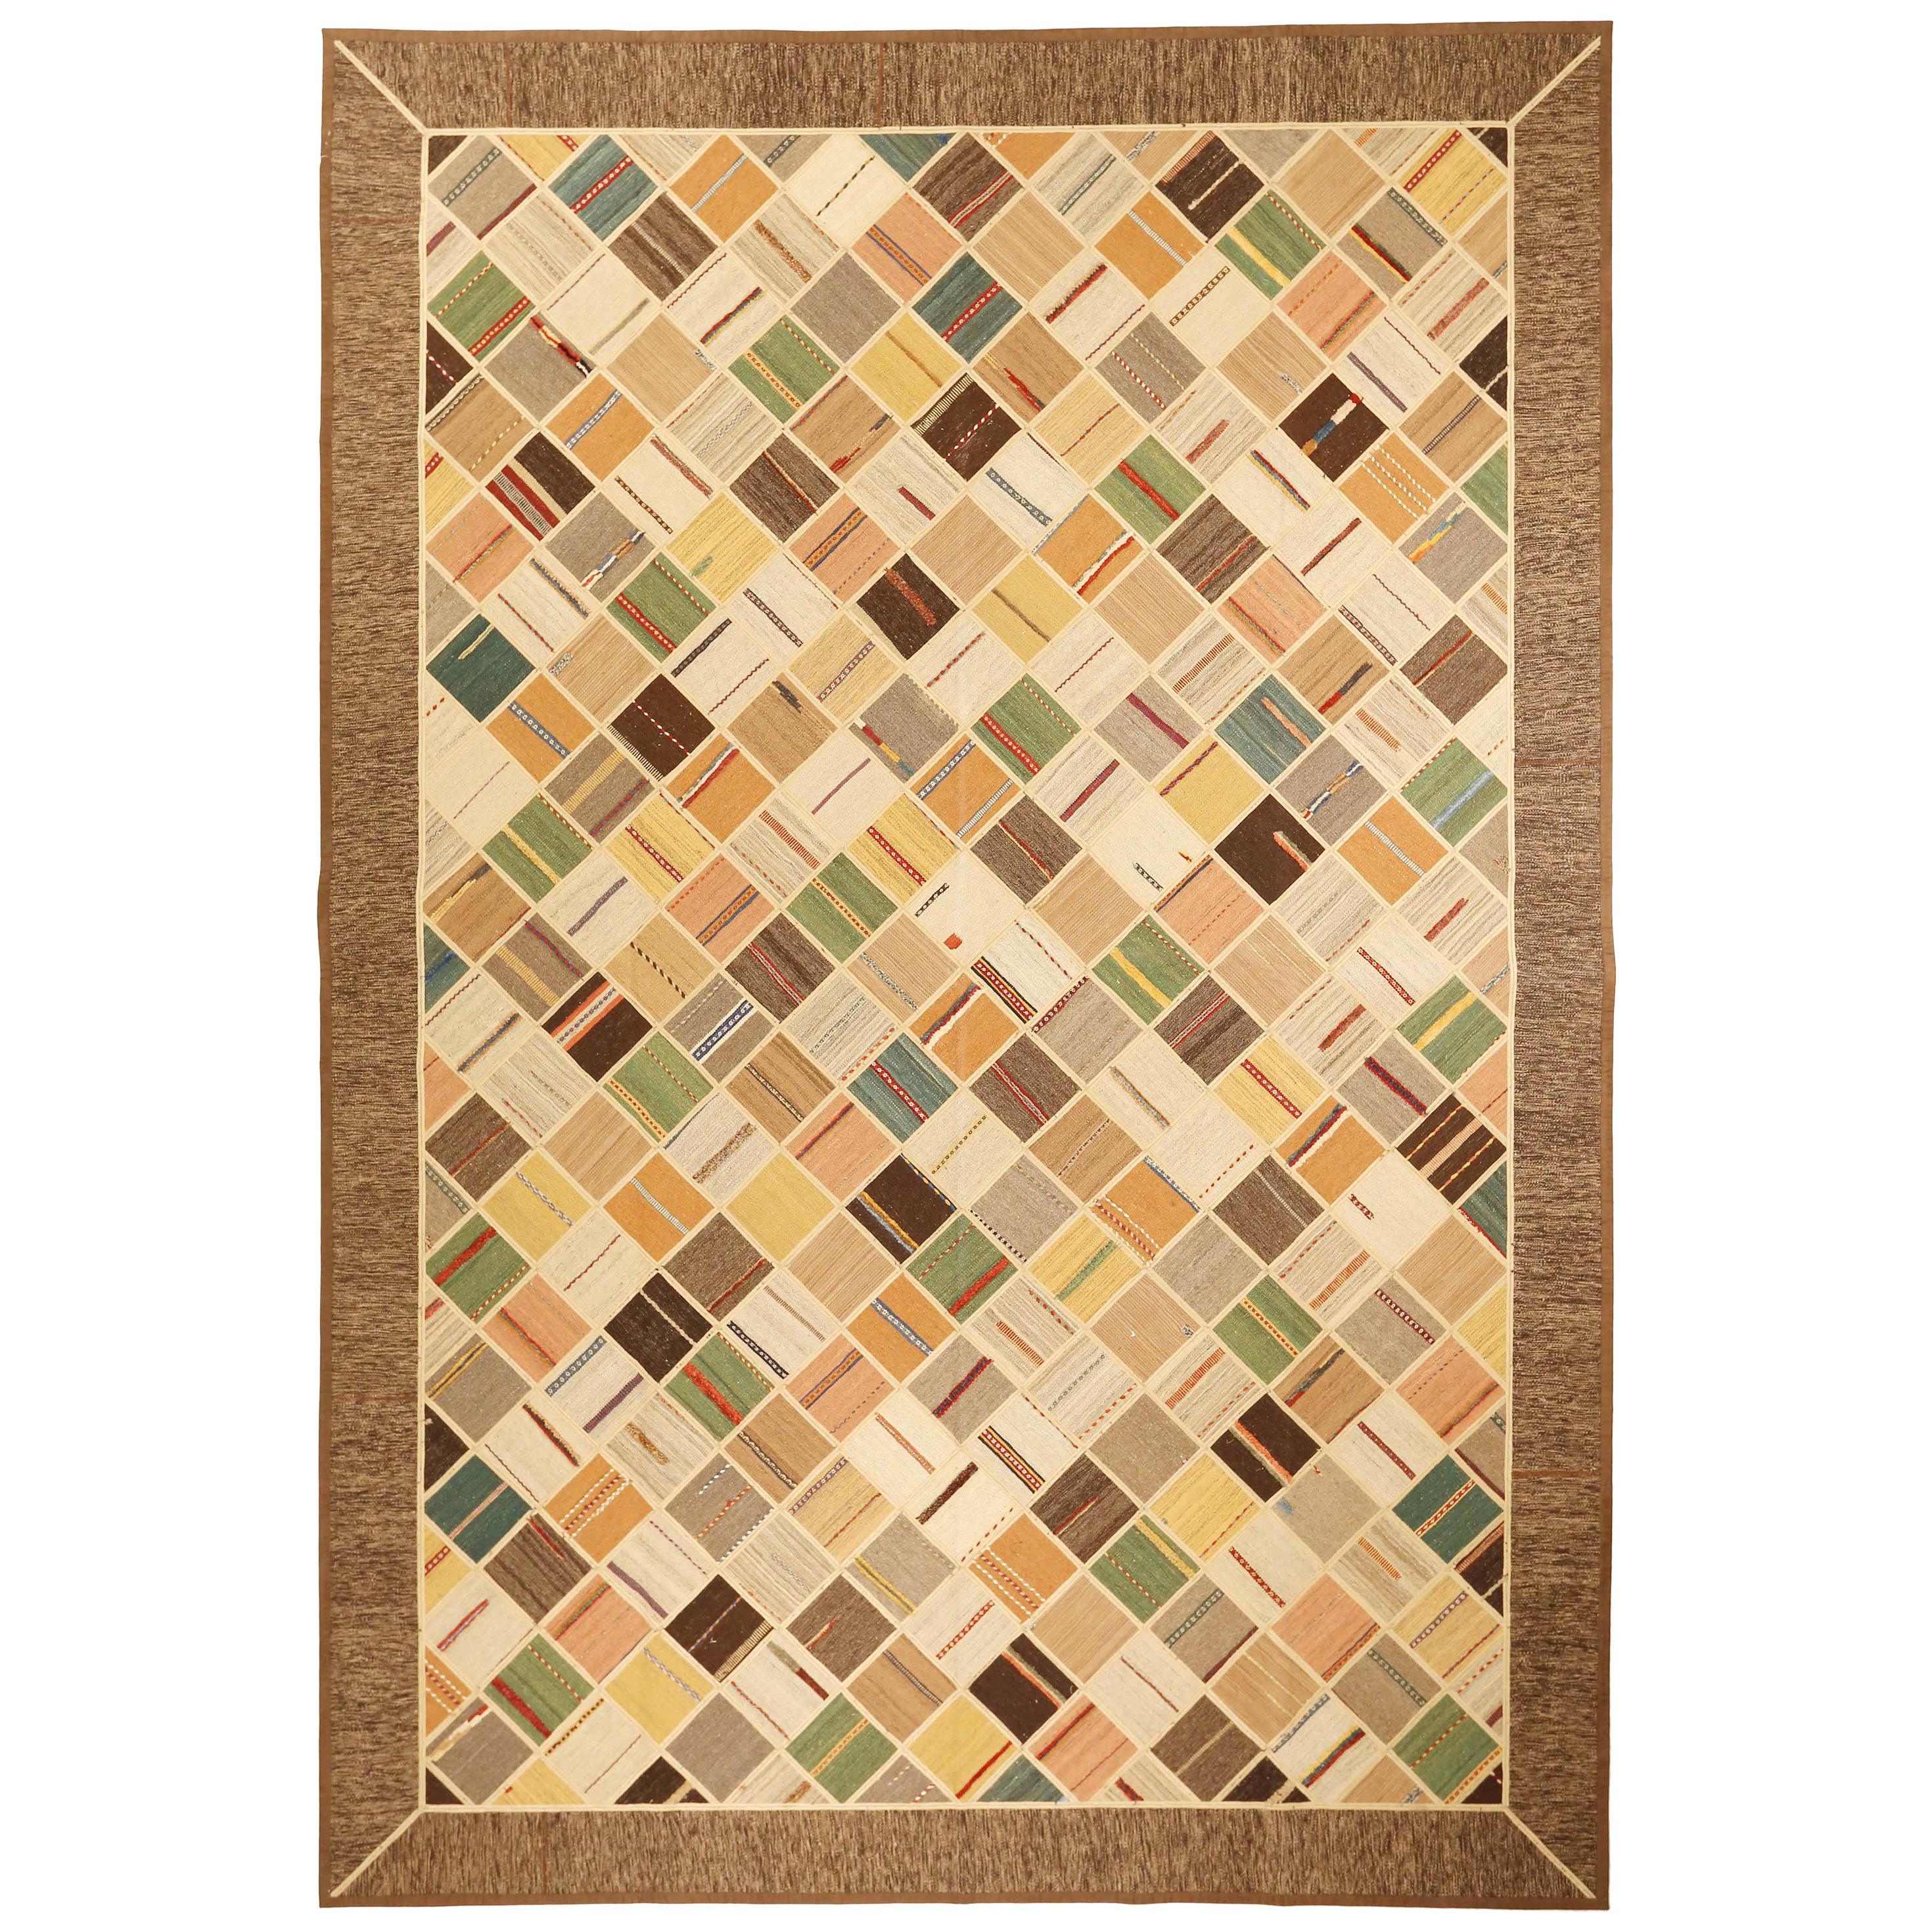 Modern Turkish Patch Kilim Rug with Colored Diagonal Tile Patterns For Sale